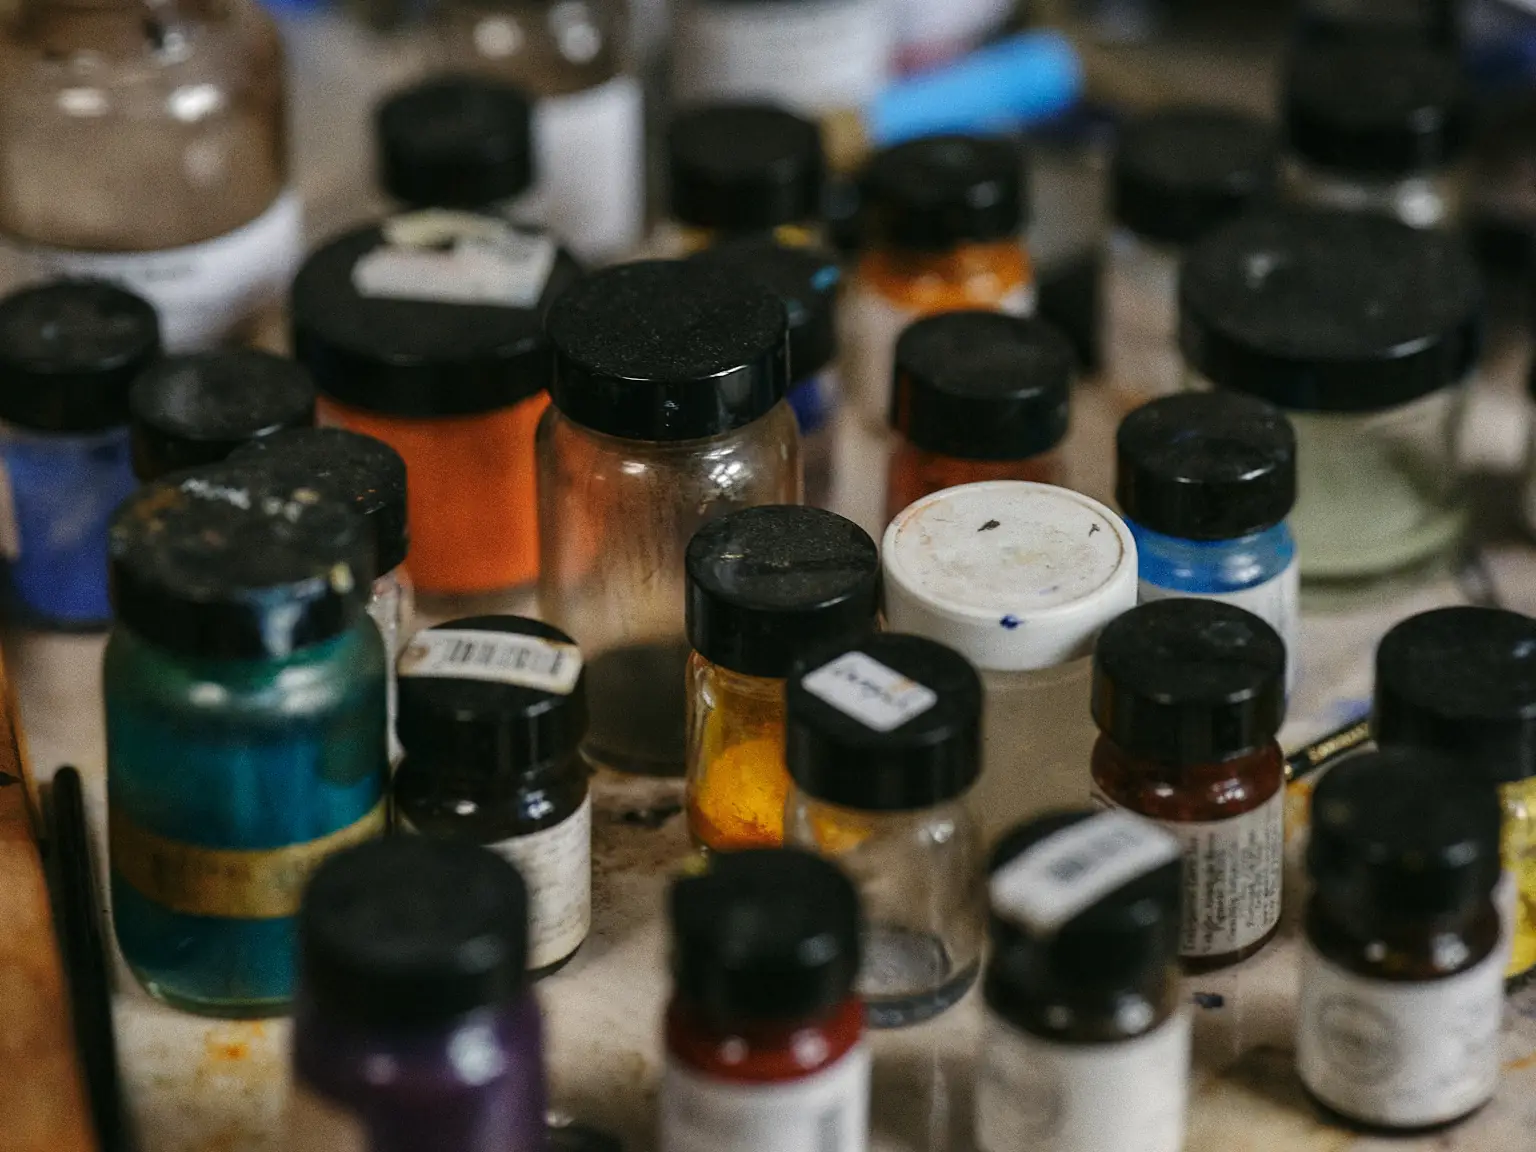 A photo of jars containing pigments.